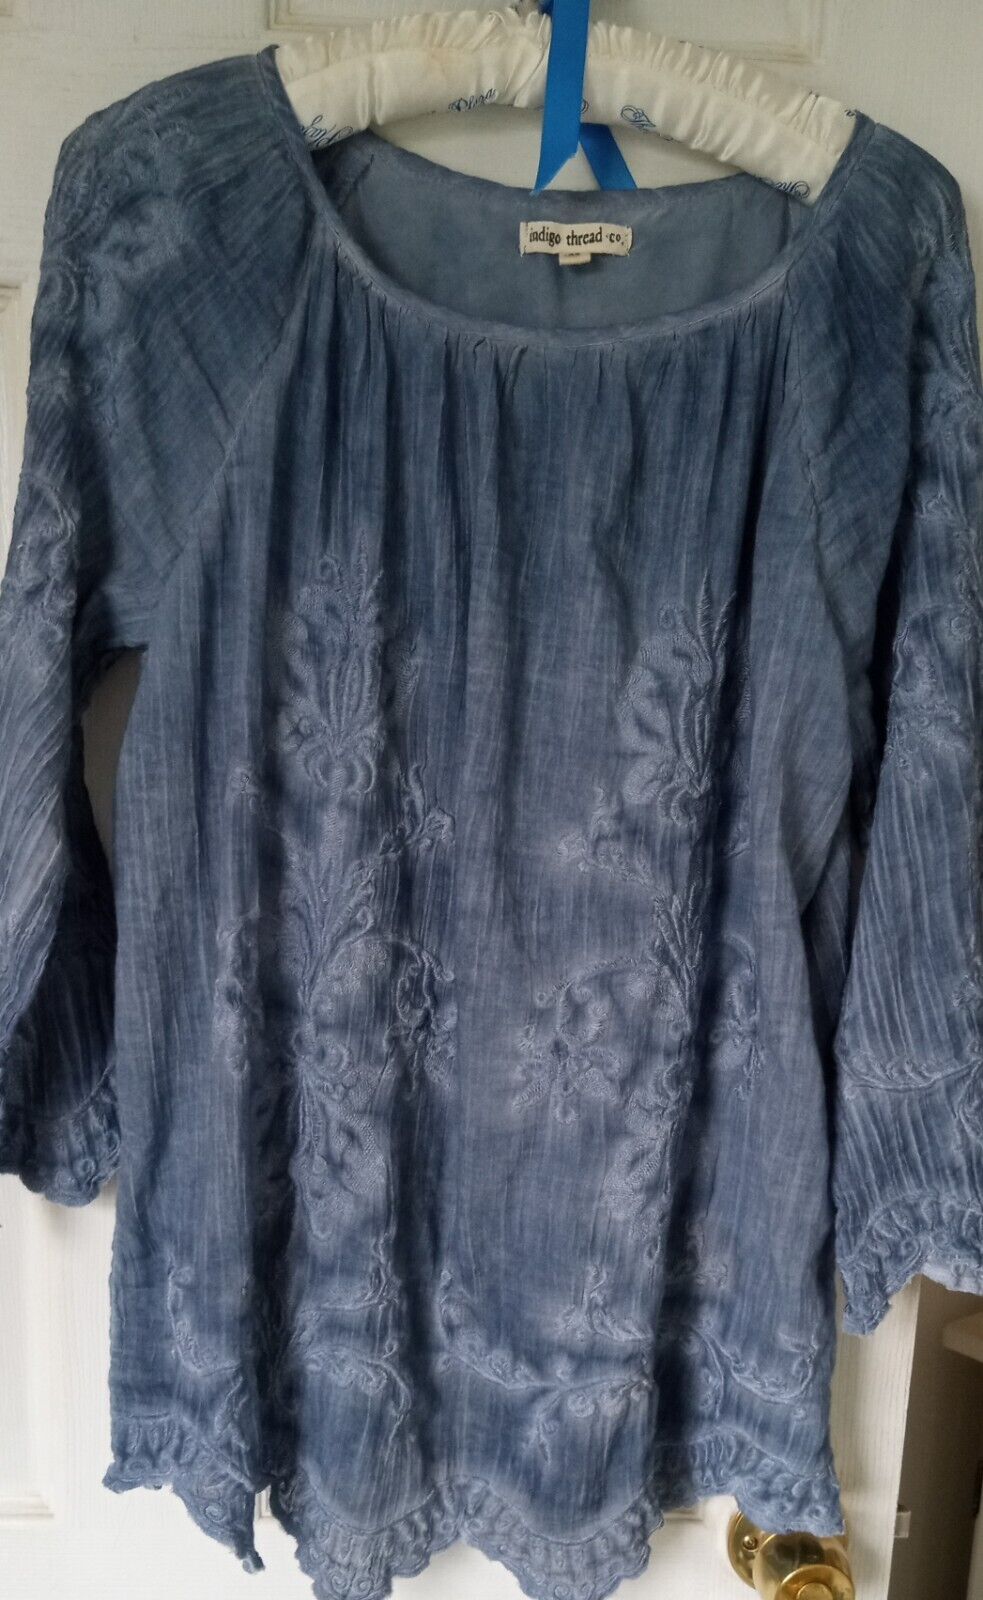  Indigo Thread Co Blue Embroidered Flower Blouse Size XS/S